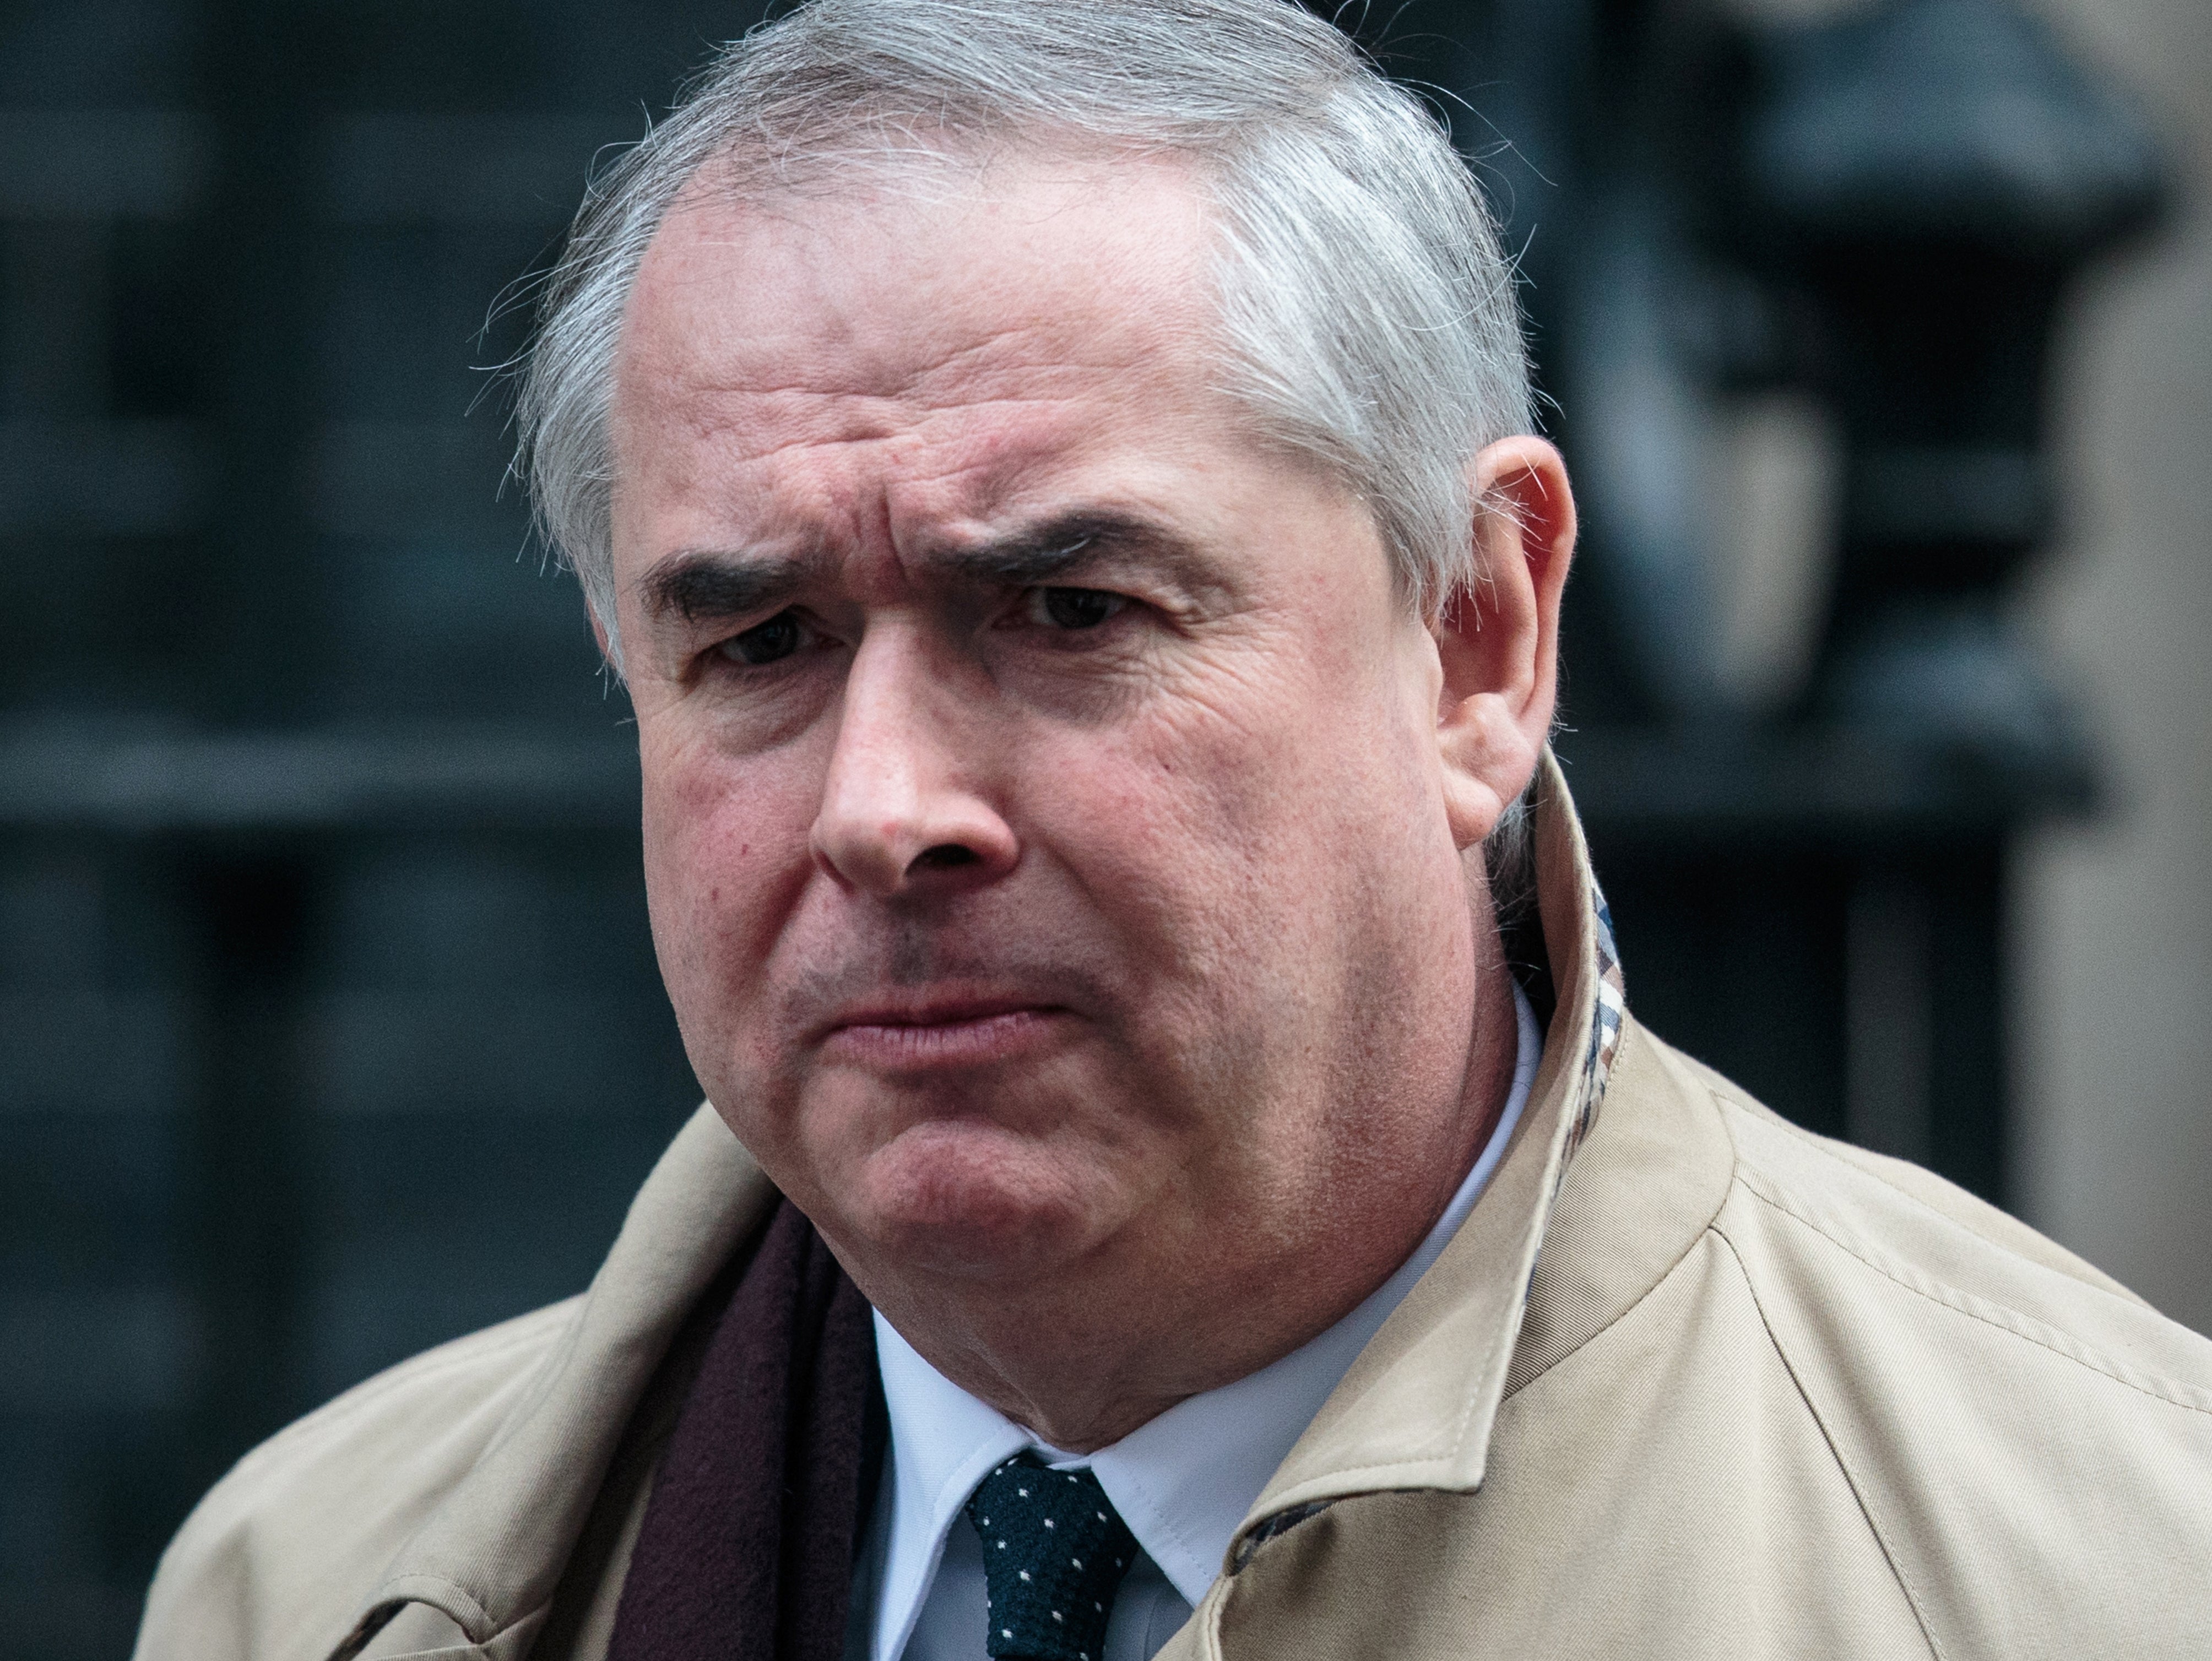 Sir Geoffrey Cox claims taxpayer funding to rent a London home while collecting rent on another property he co-owns in the capital